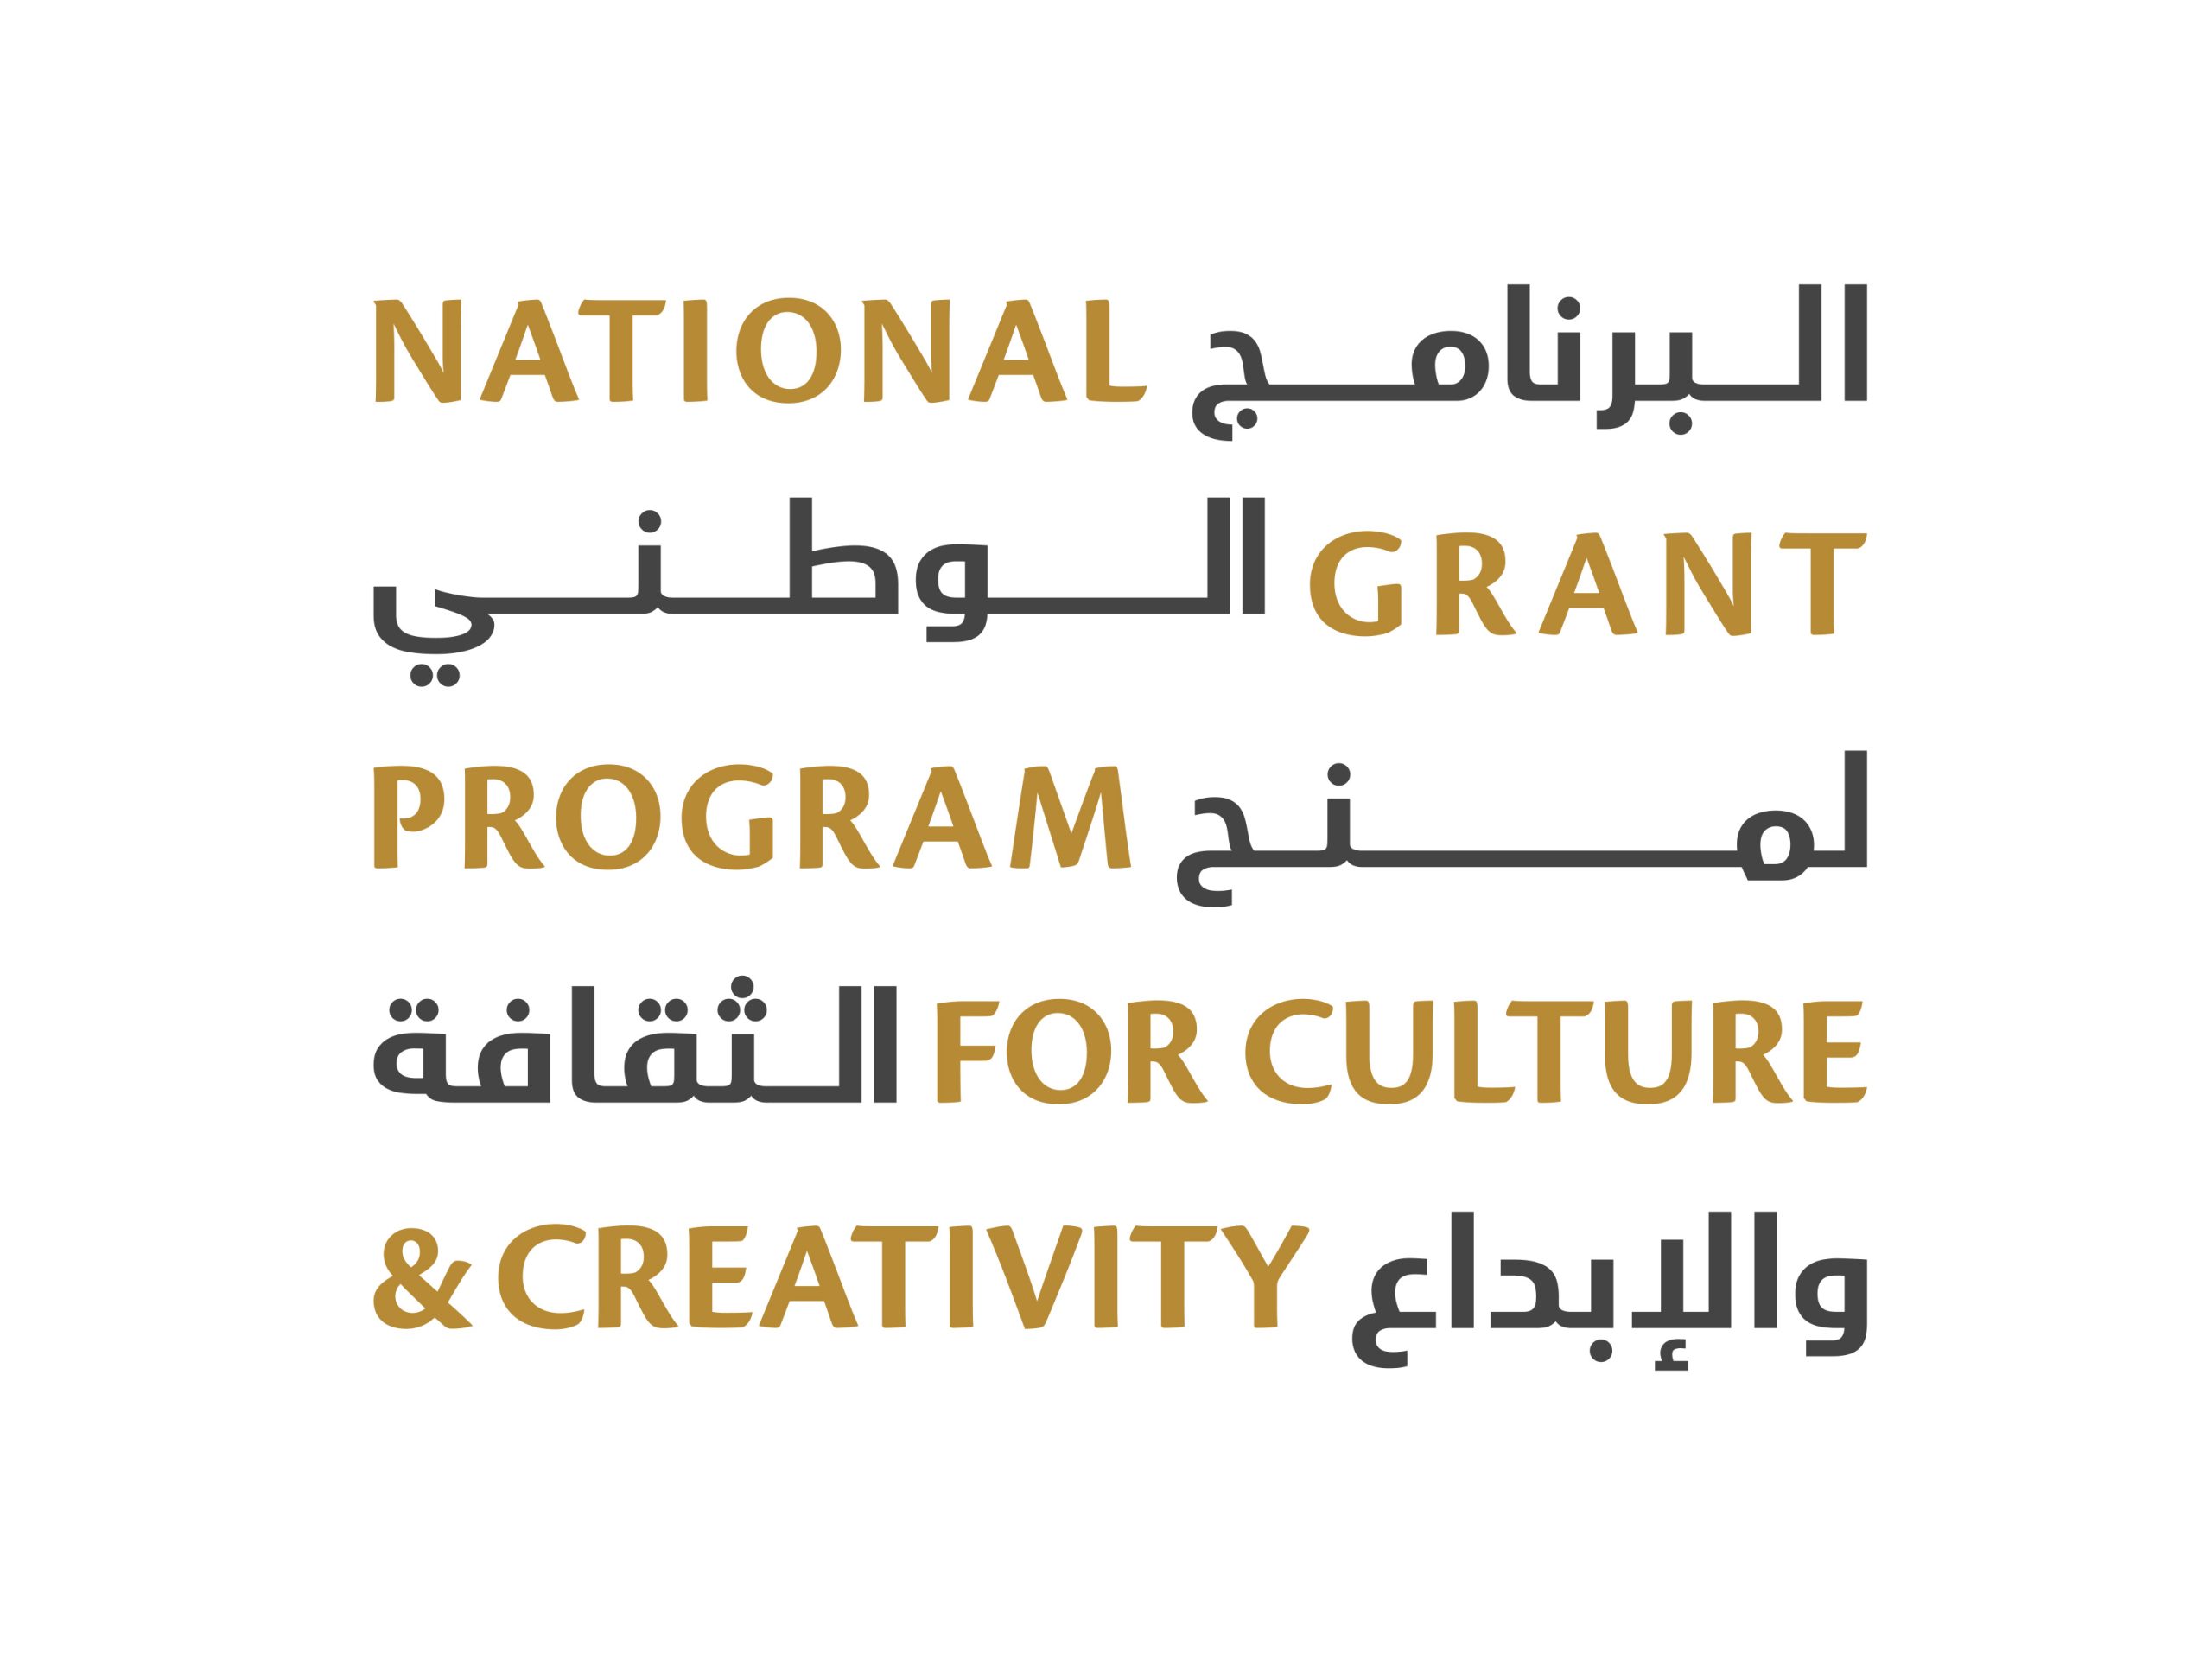 Ministry of Culture invites Emirati creatives to apply for the 2nd cycle of National Grant Program for Culture and Creativity to provide funding for creative projects